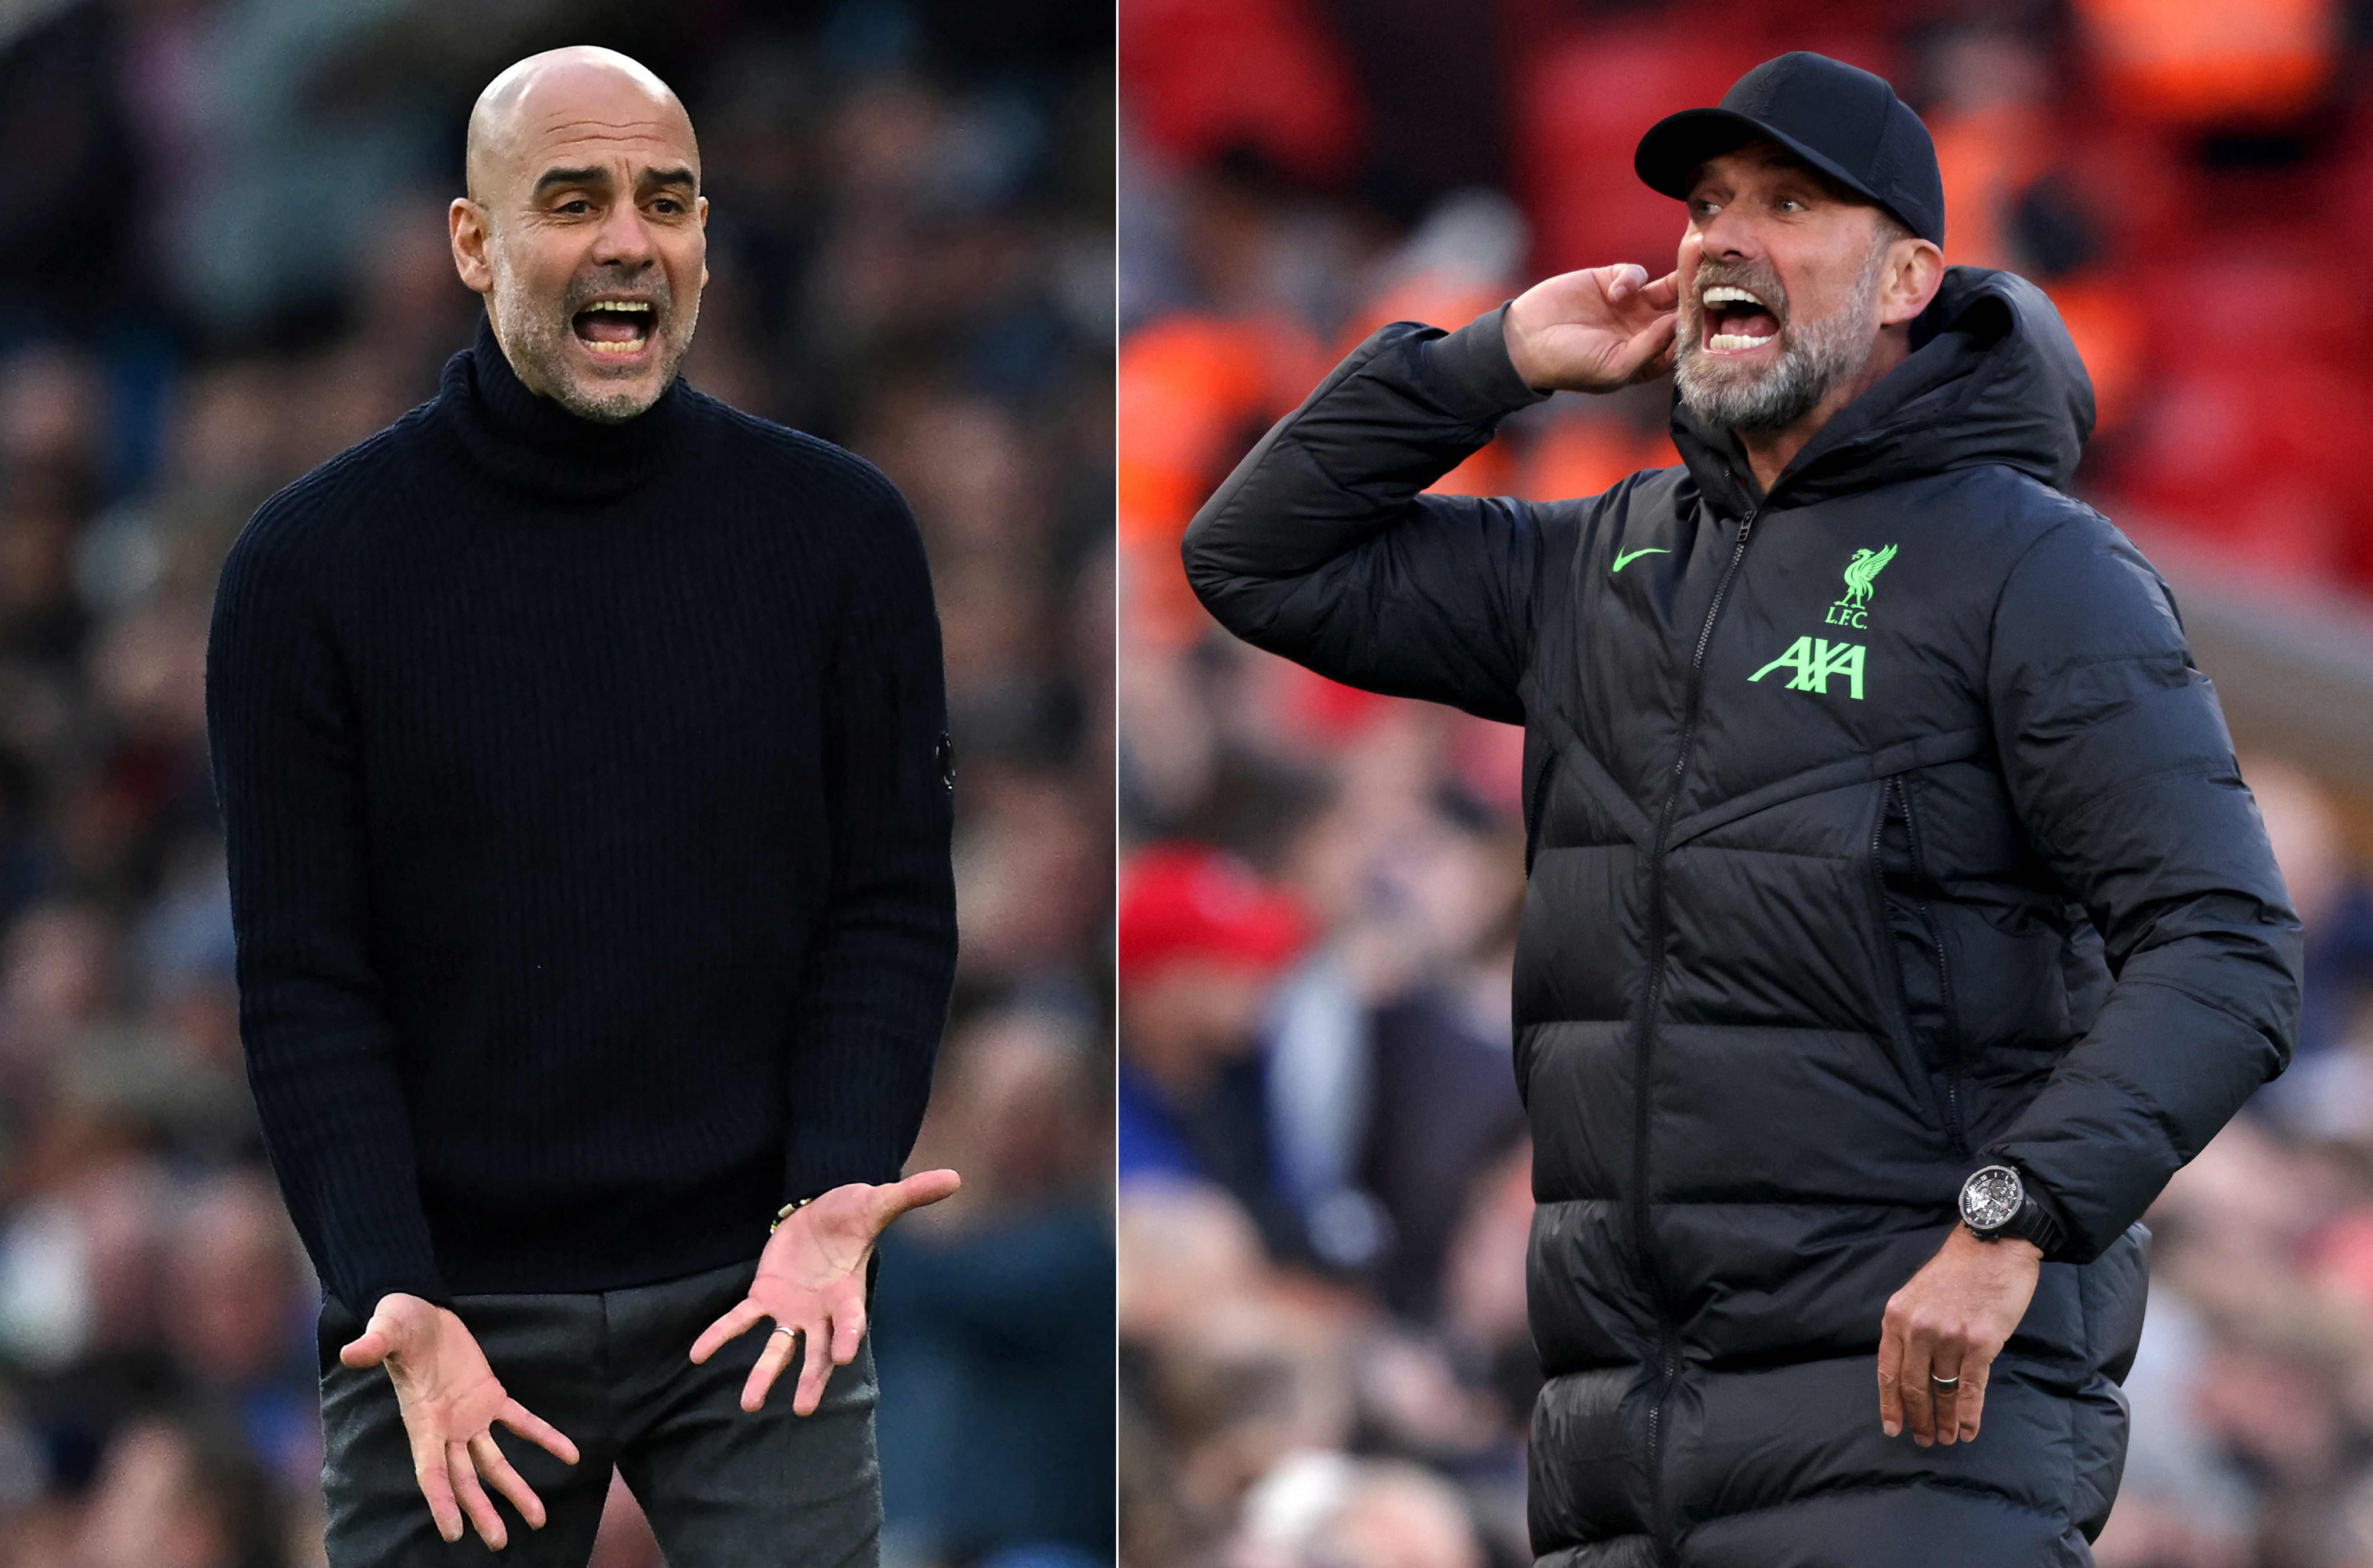 Jurgen Klopp v Pep Guardiola: Farewell to one of the EPL’s greatest rivalries